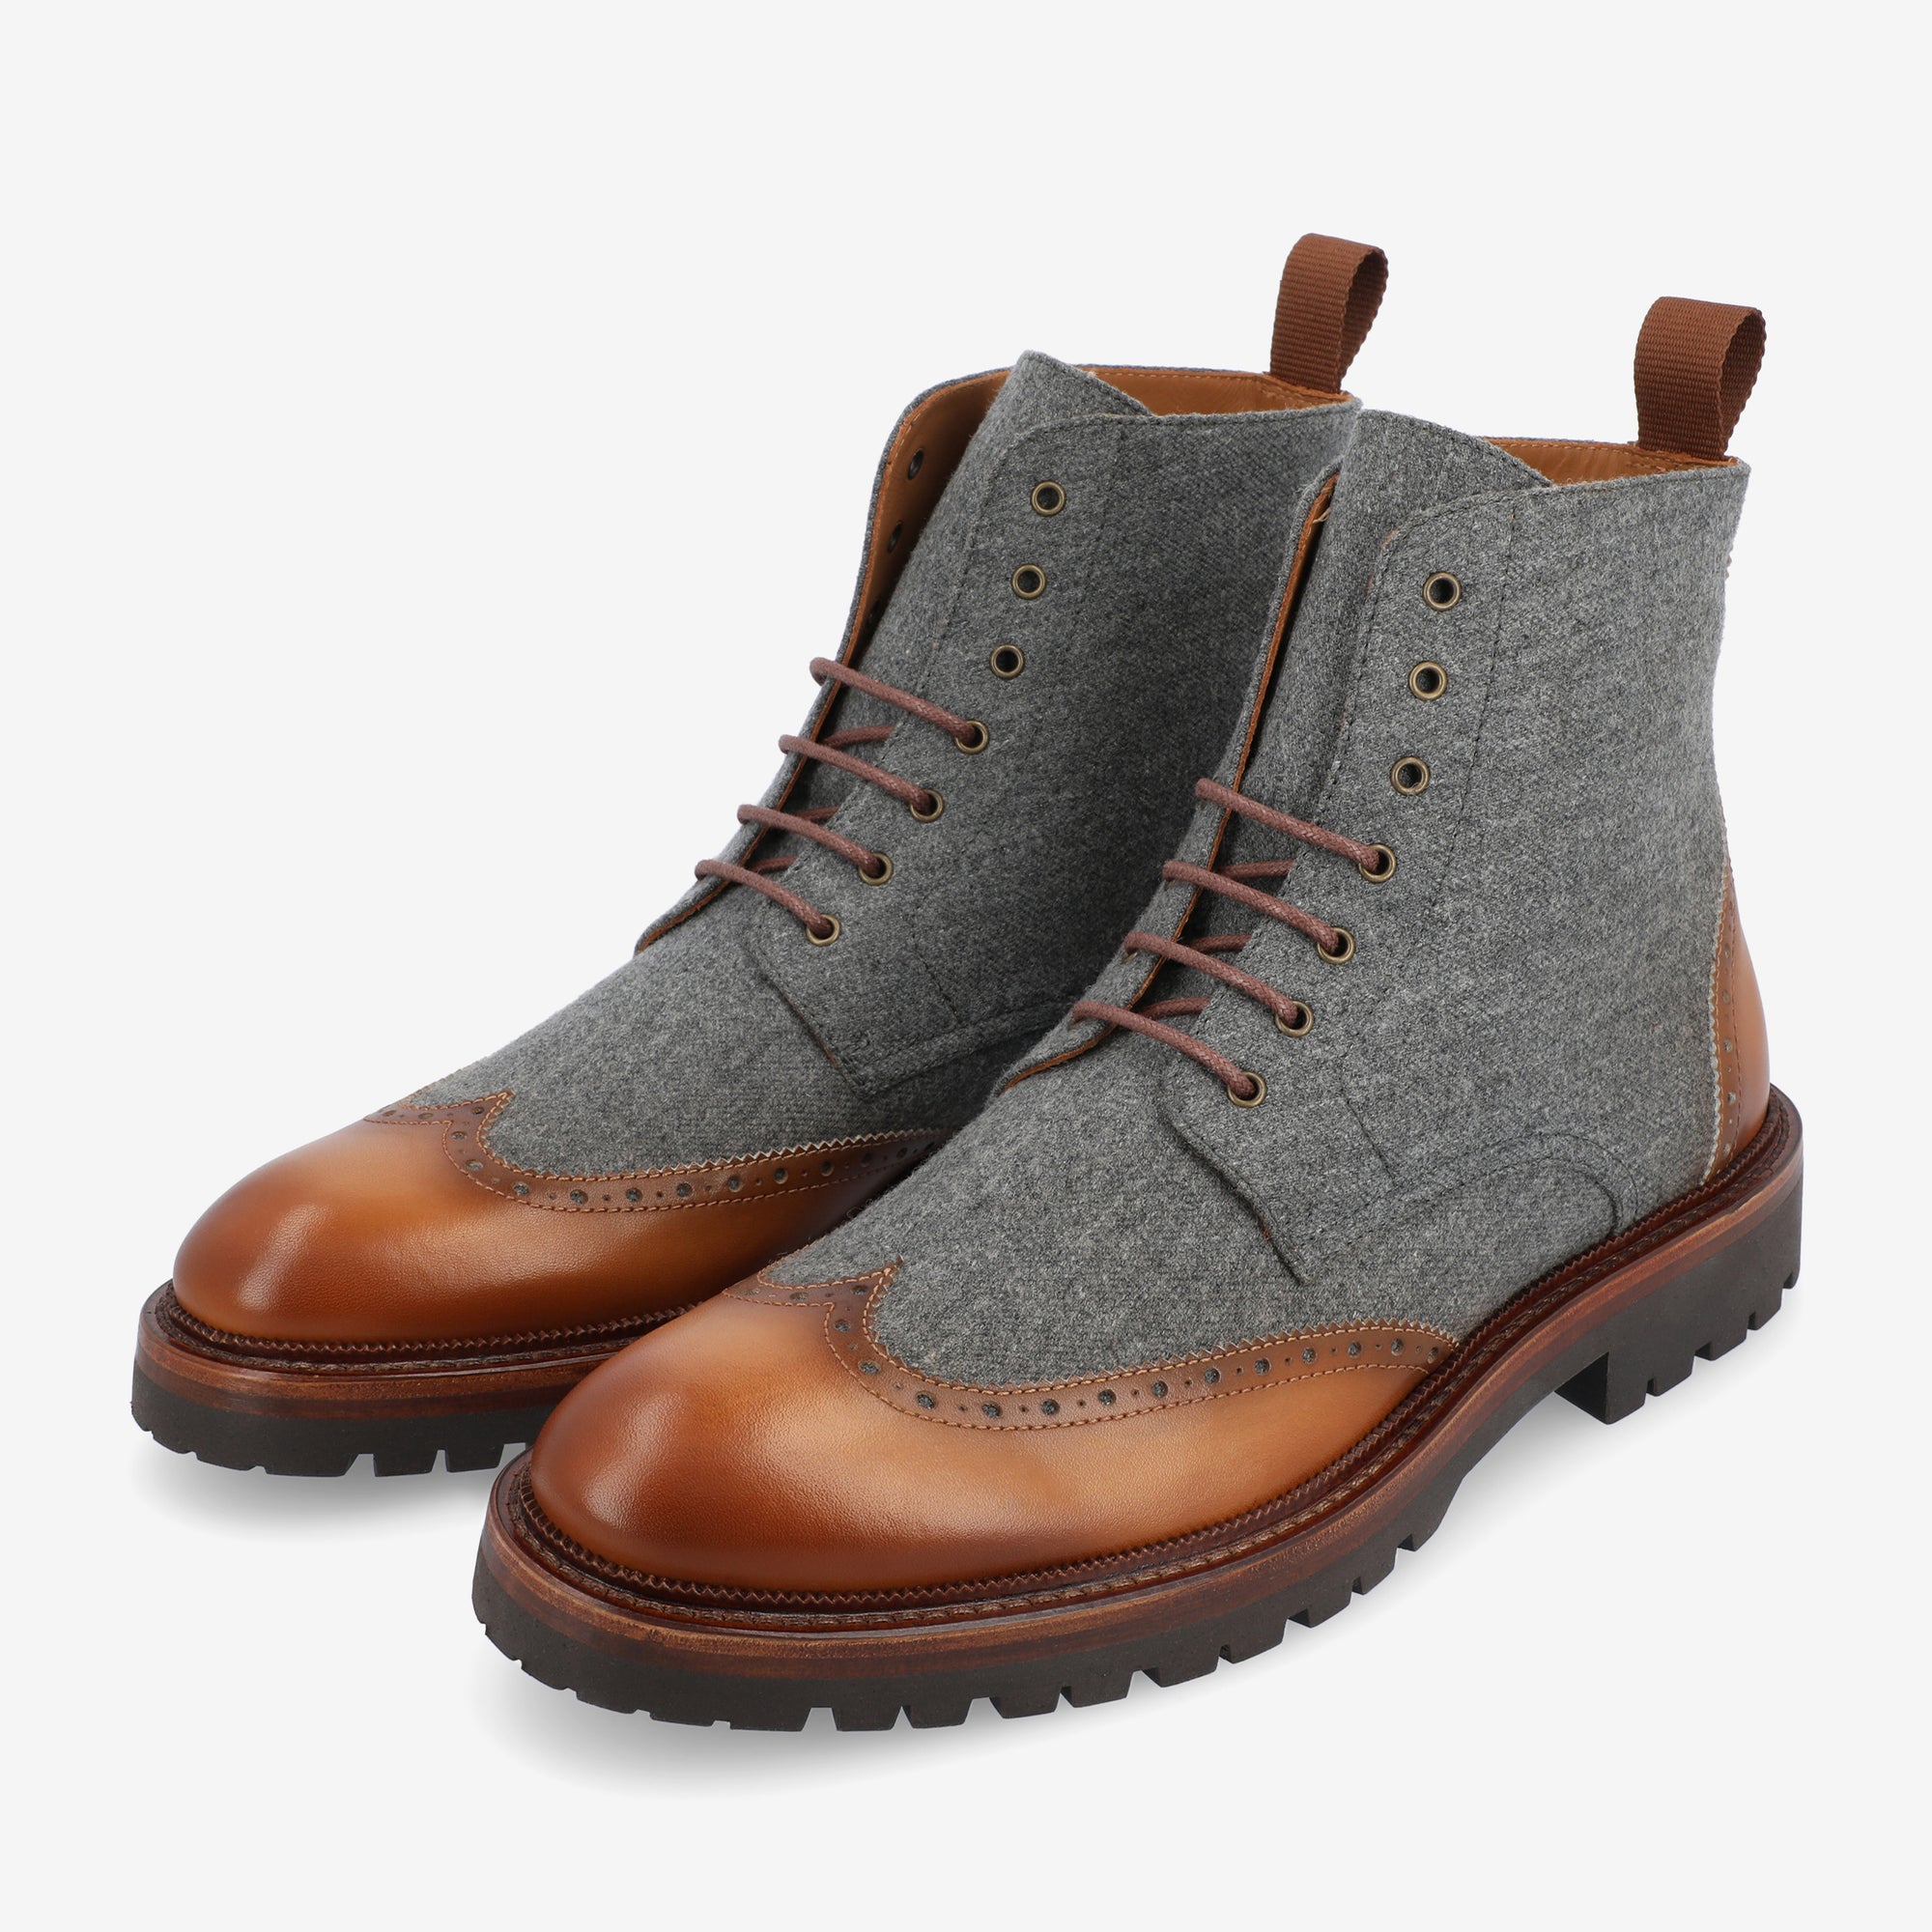 The Livingston Boot in Grey/Brown